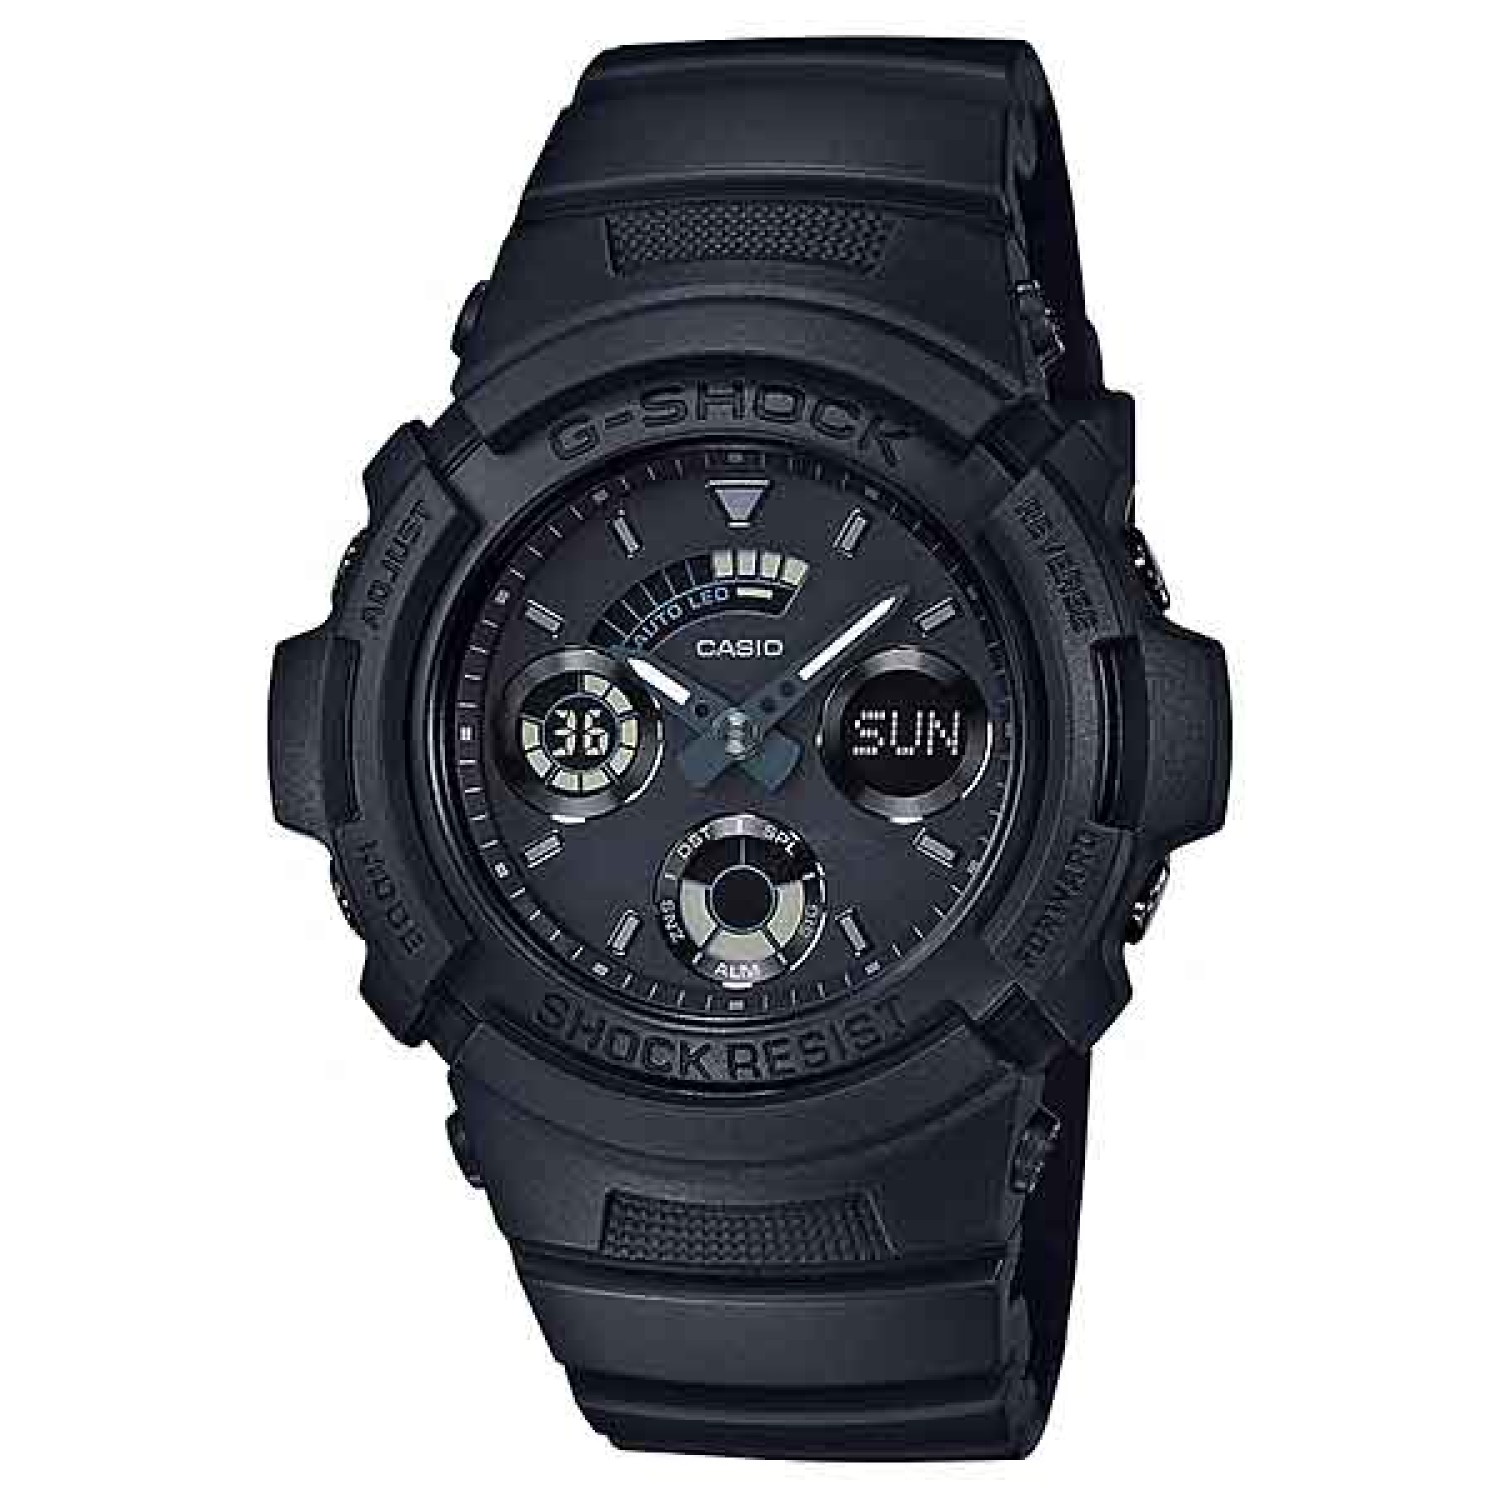 AW591BB-1A G-Shock. From G-SHOCK, the watch that sets the standard for timekeeping toughness, comes the latest models to feature basic G-SHOCK black that captures the essence of one-tone resin. This model is based on the compact and practic @christies.onl